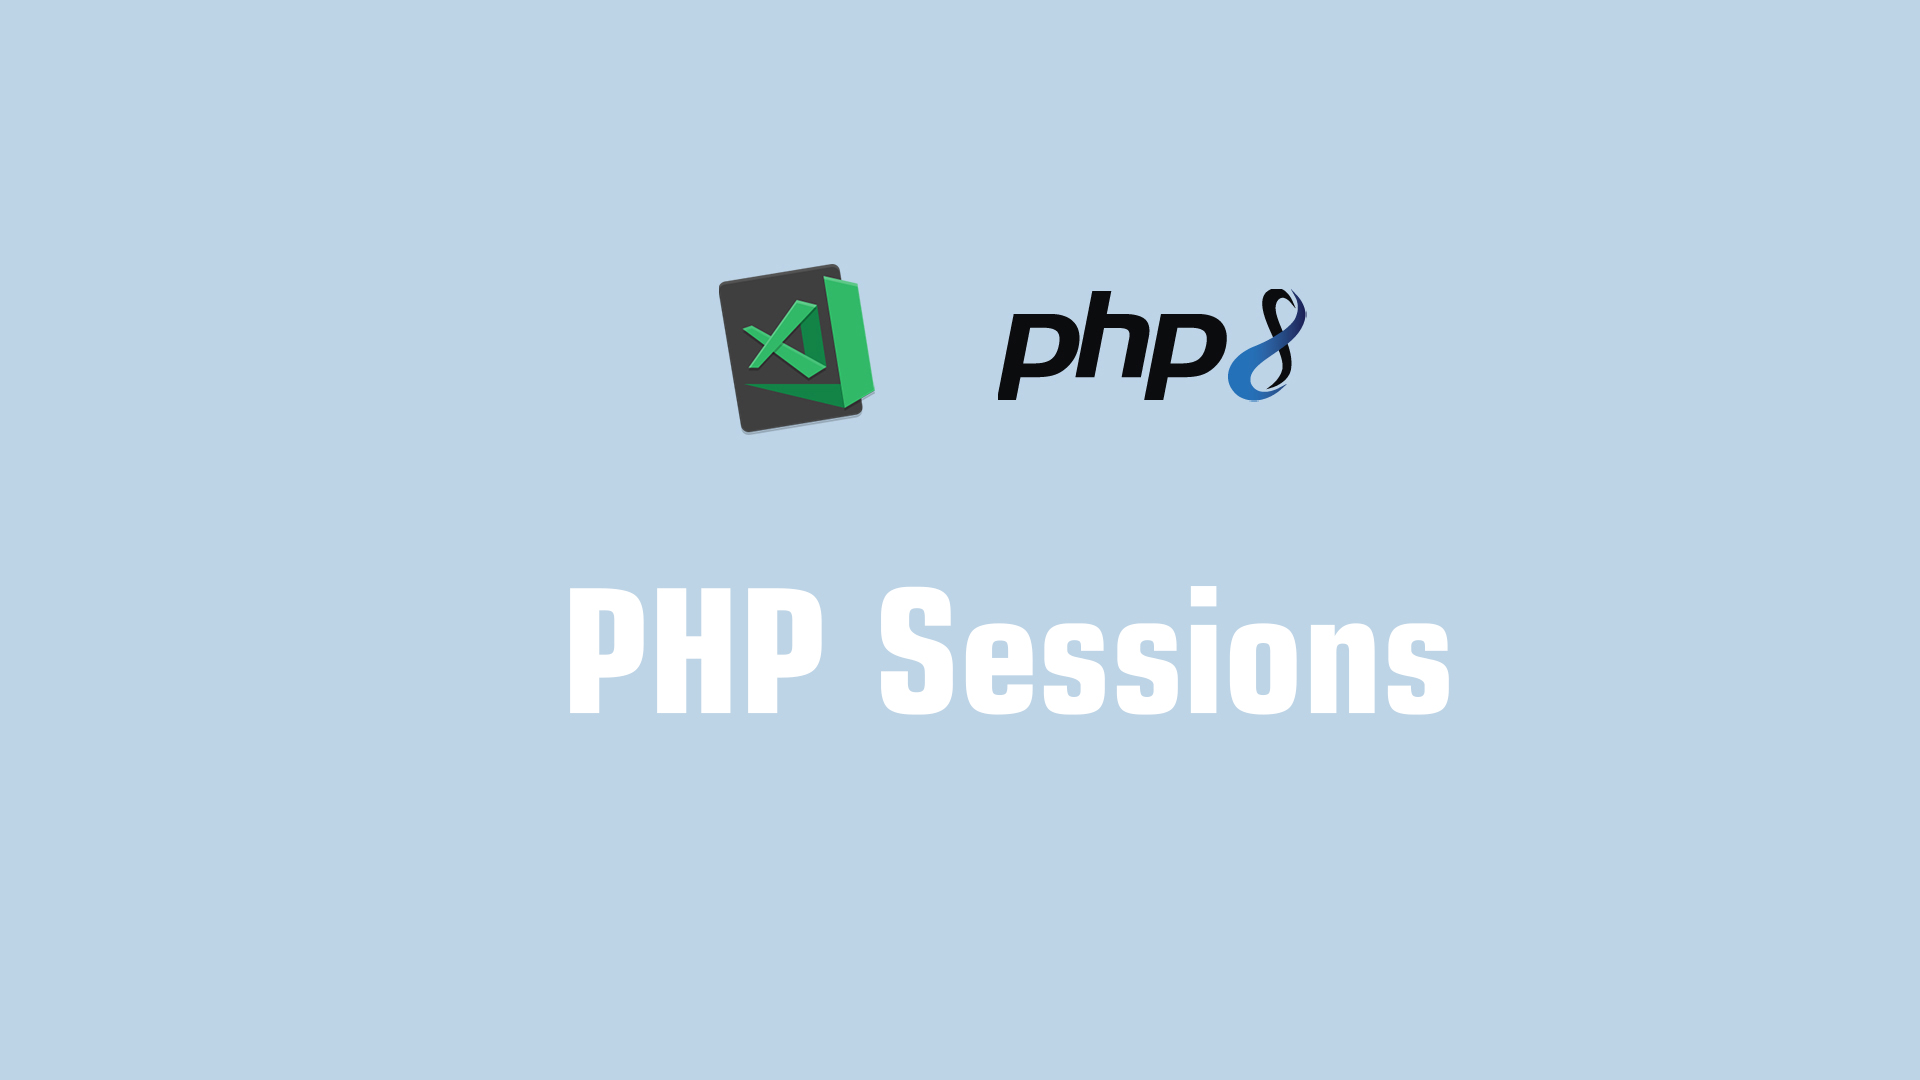 Сортировки php. Php array. Session php. In_array php. New start session